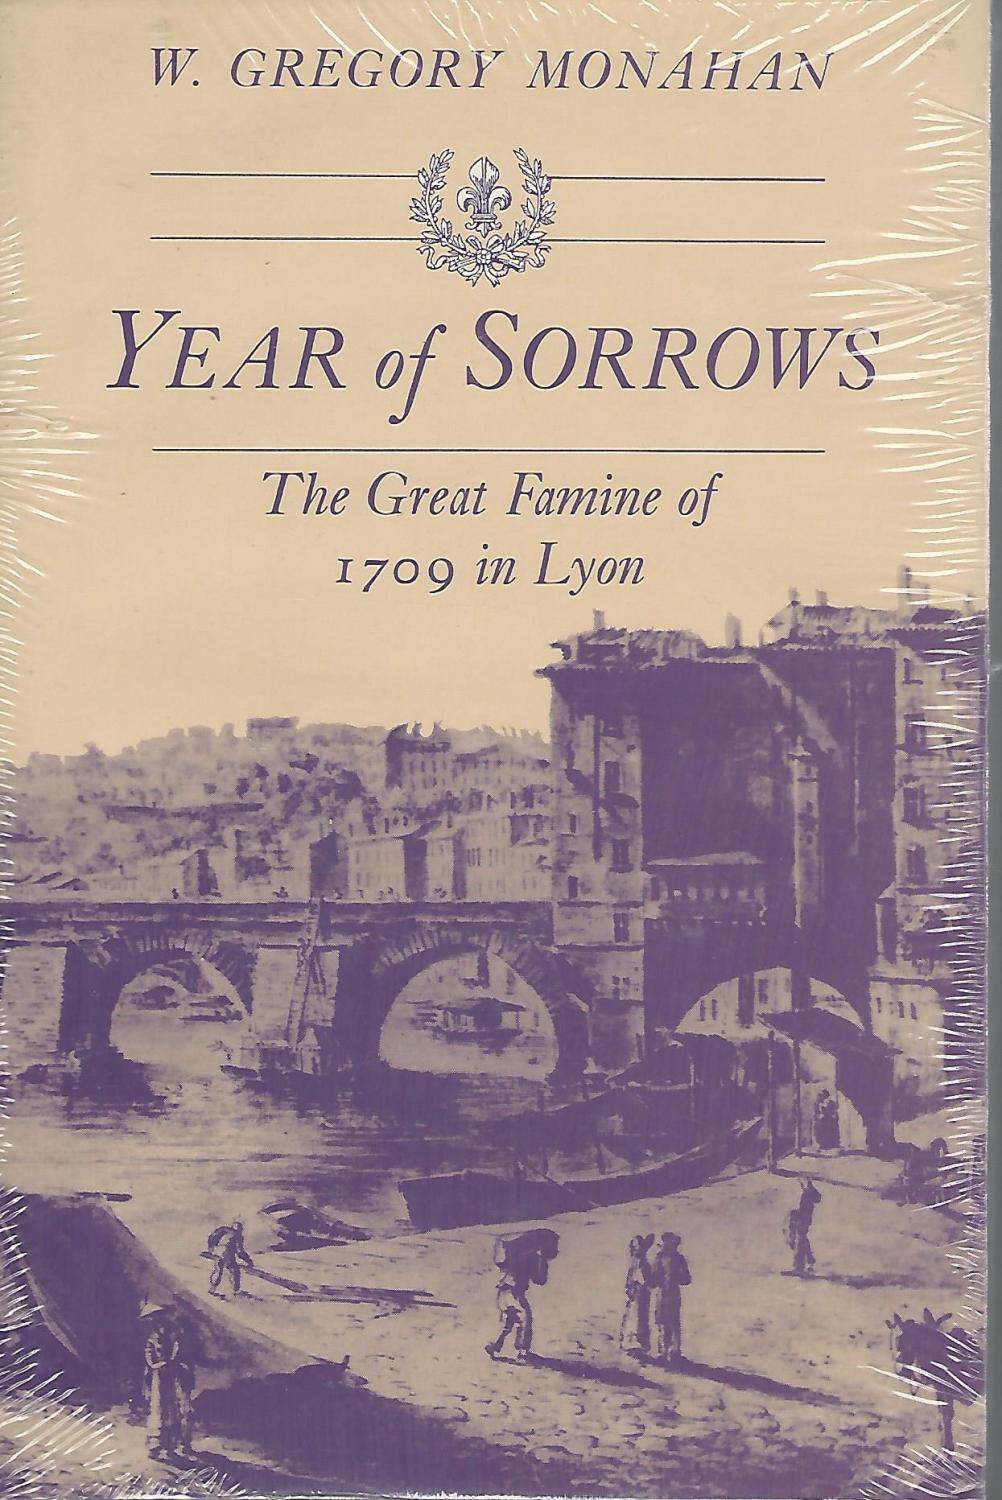 Year of Sorrows: The Great Famine of 1709 in Lyon - Monahan, W. Gregory